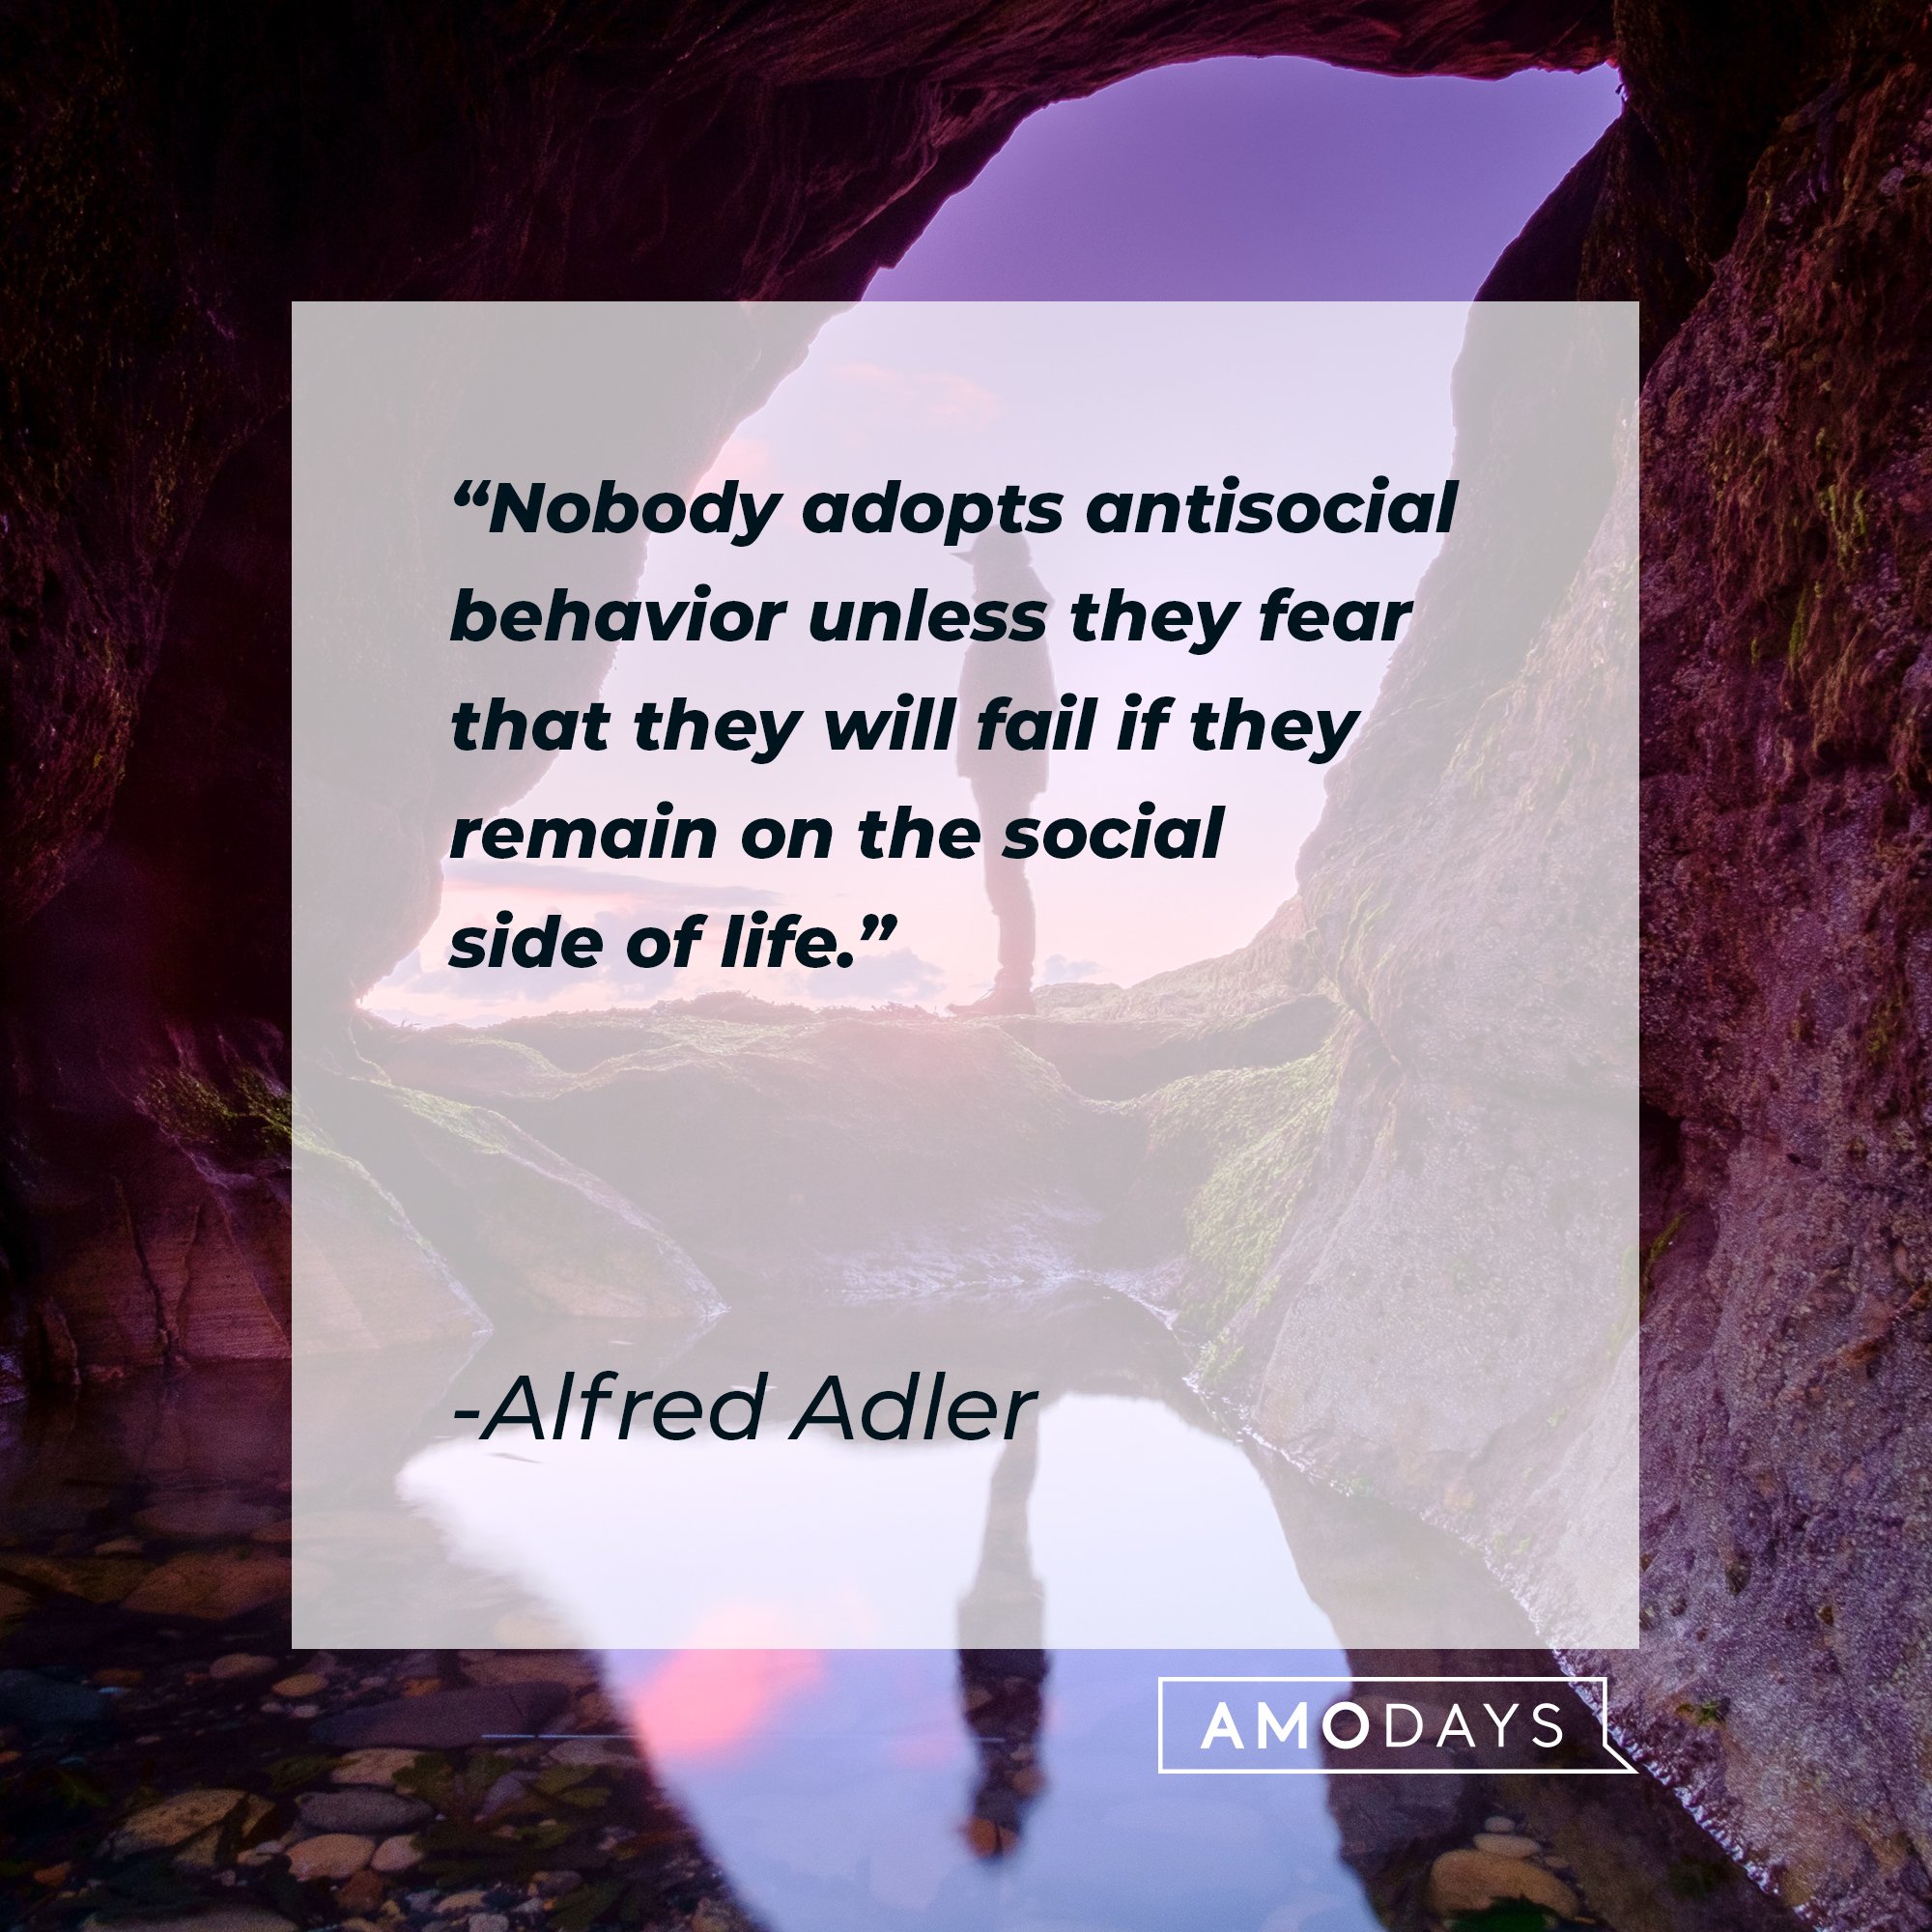   Alfred Adler’s quote: "Nobody adopts antisocial behavior unless they fear that they will fail if they remain on the social side of life." | Image: AmoDays